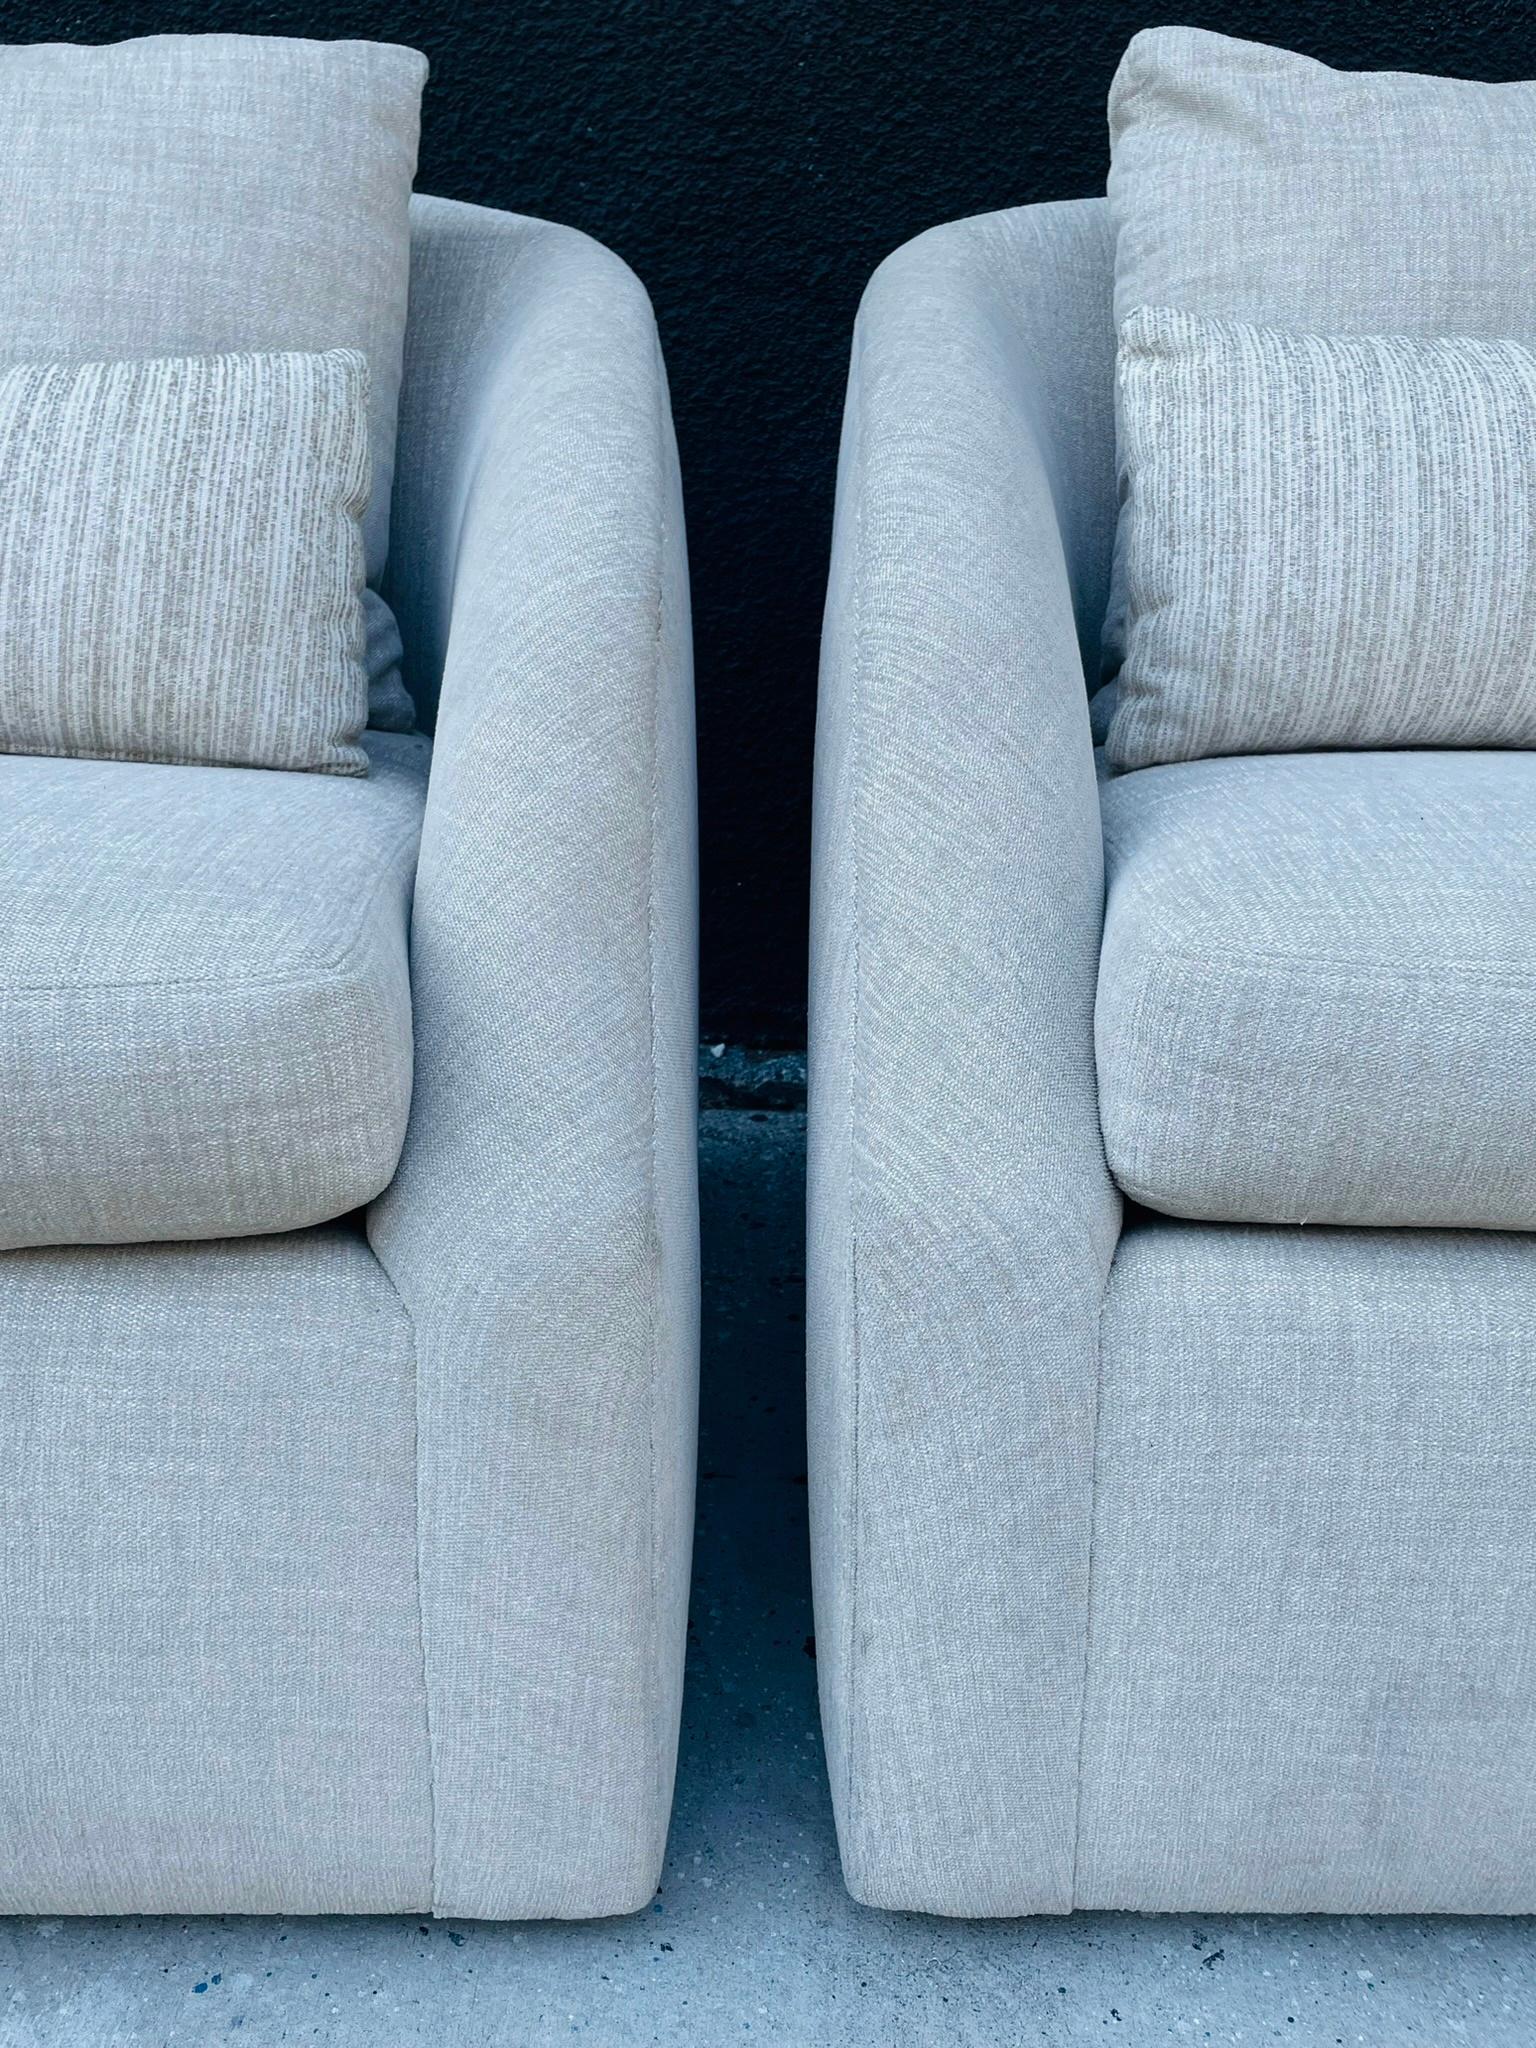 Pair of Post Modern Armchairs with a Swivel Base, USA 1990's For Sale 2